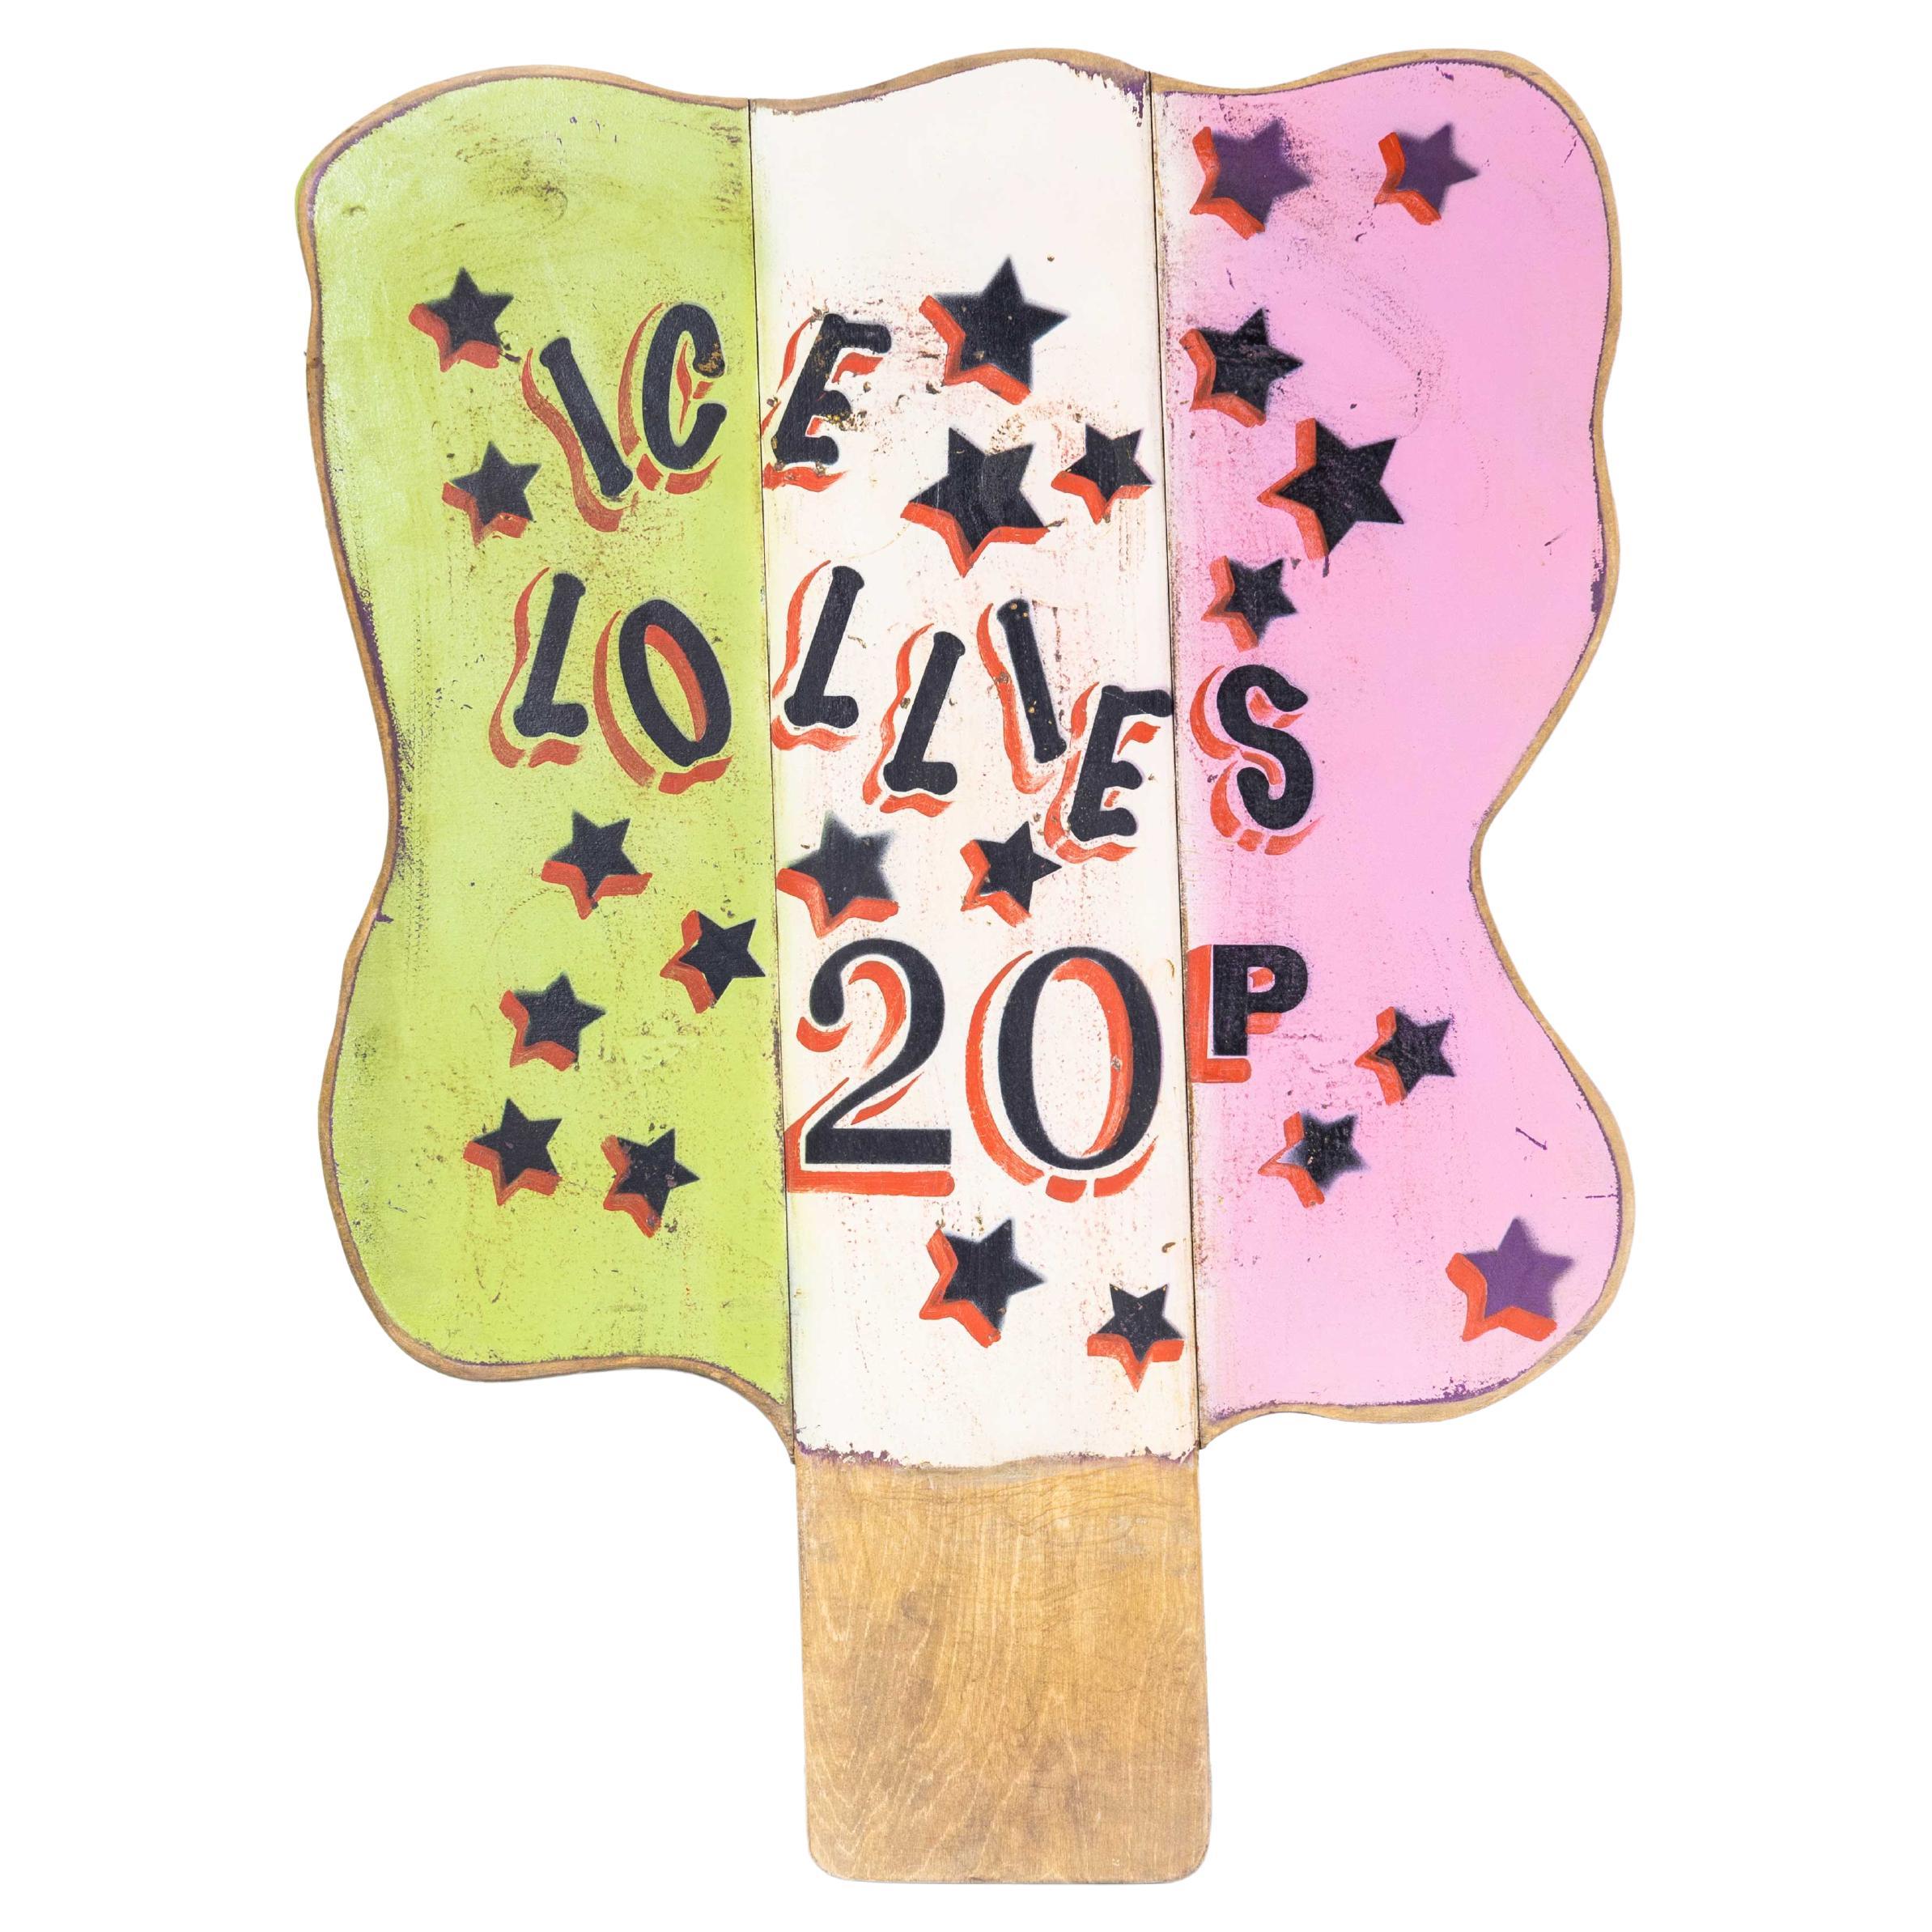 1970s Original Hand Painted Ice Lollies Fairground Sign For Sale